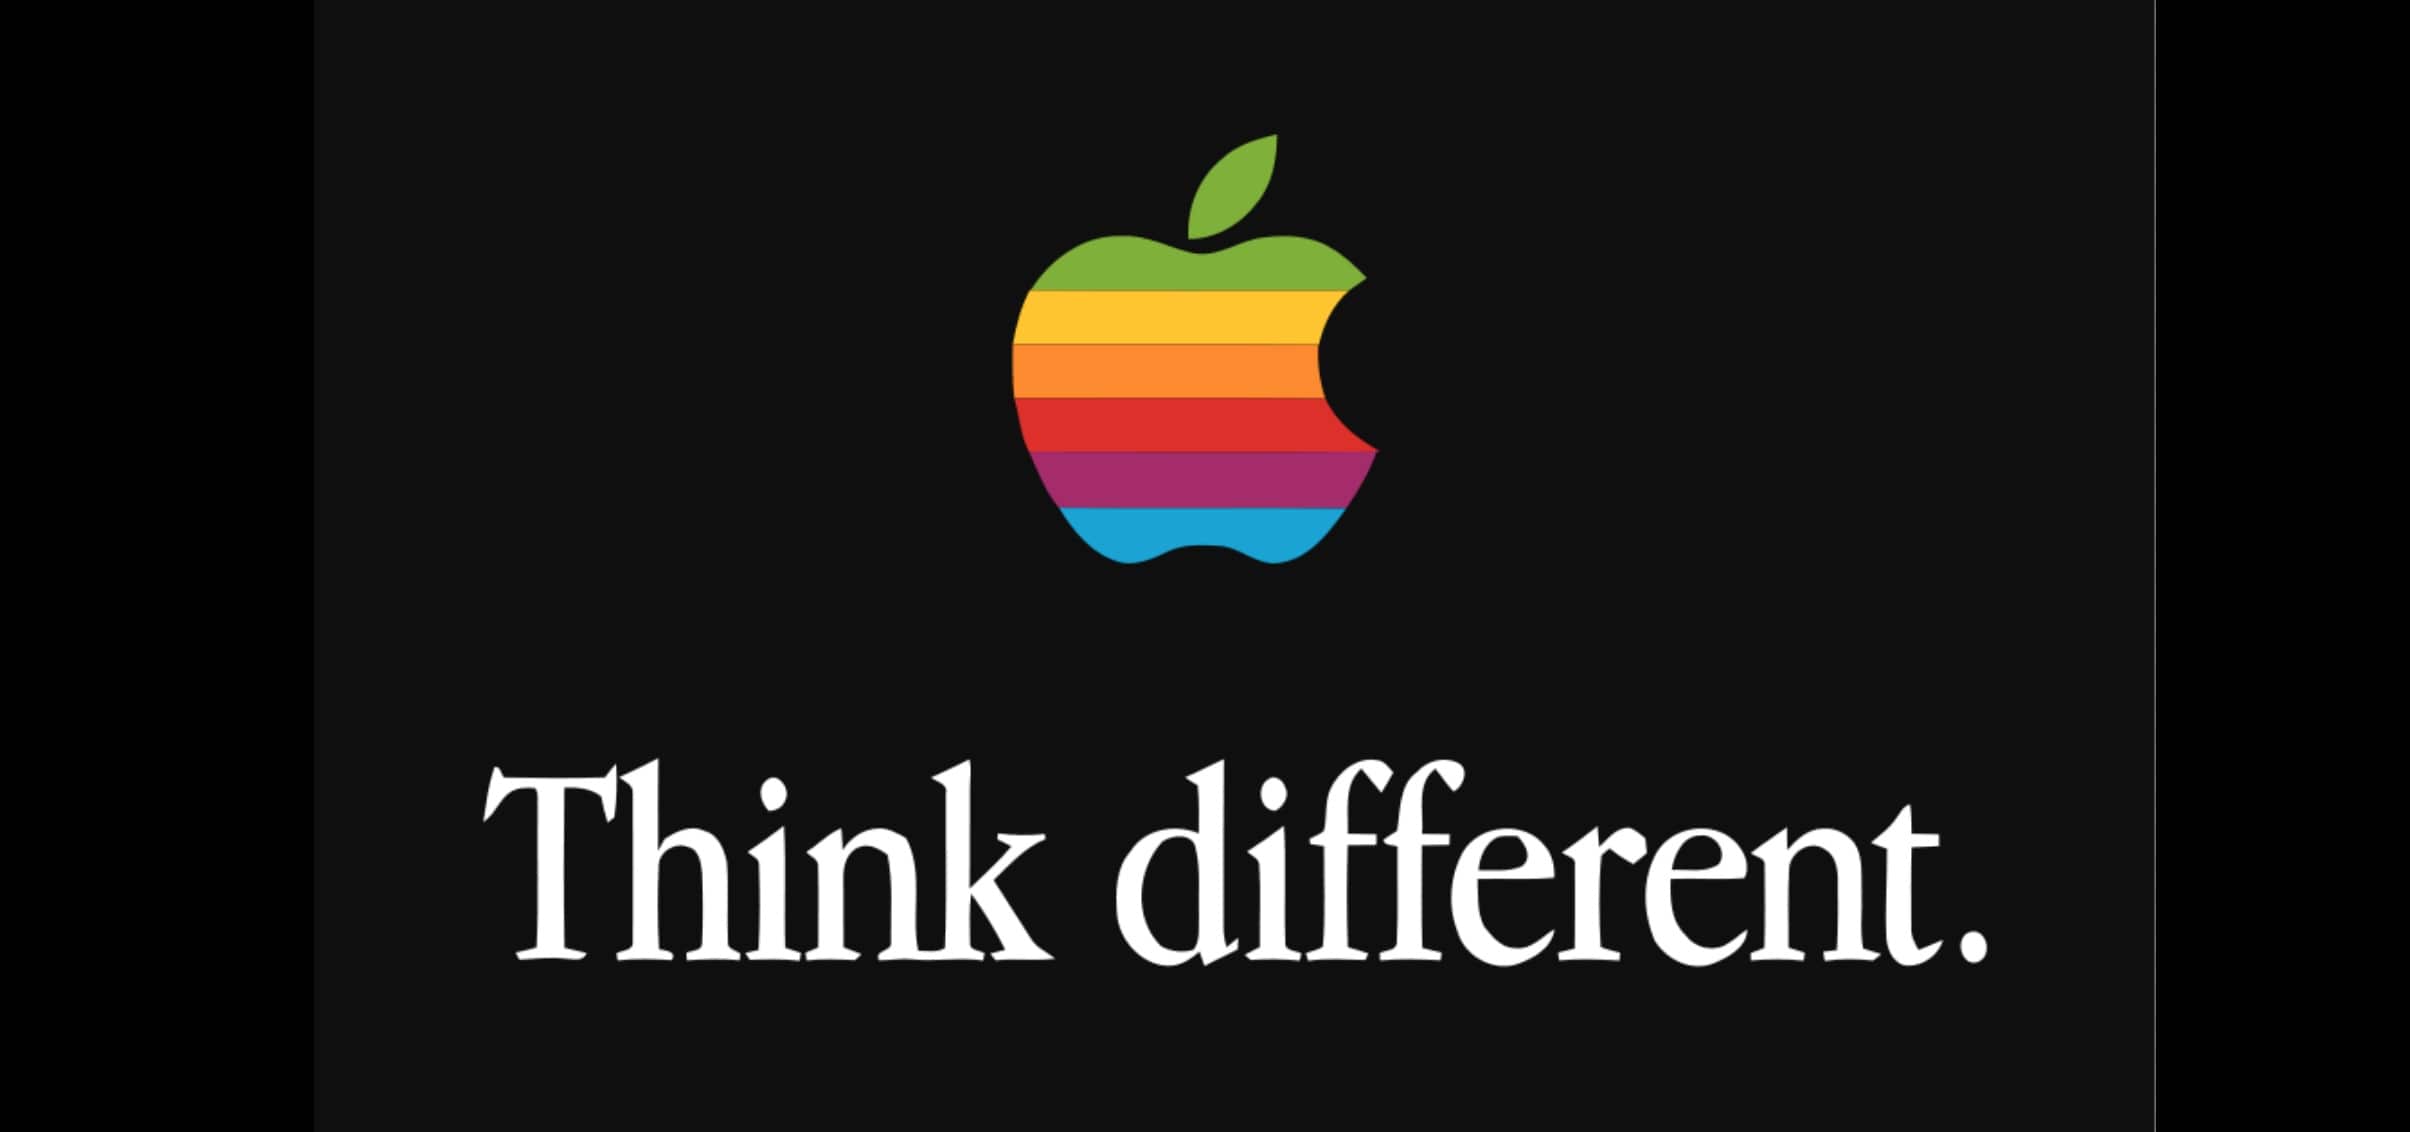 ‘Think different’ about that slogan, EU court orders Apple